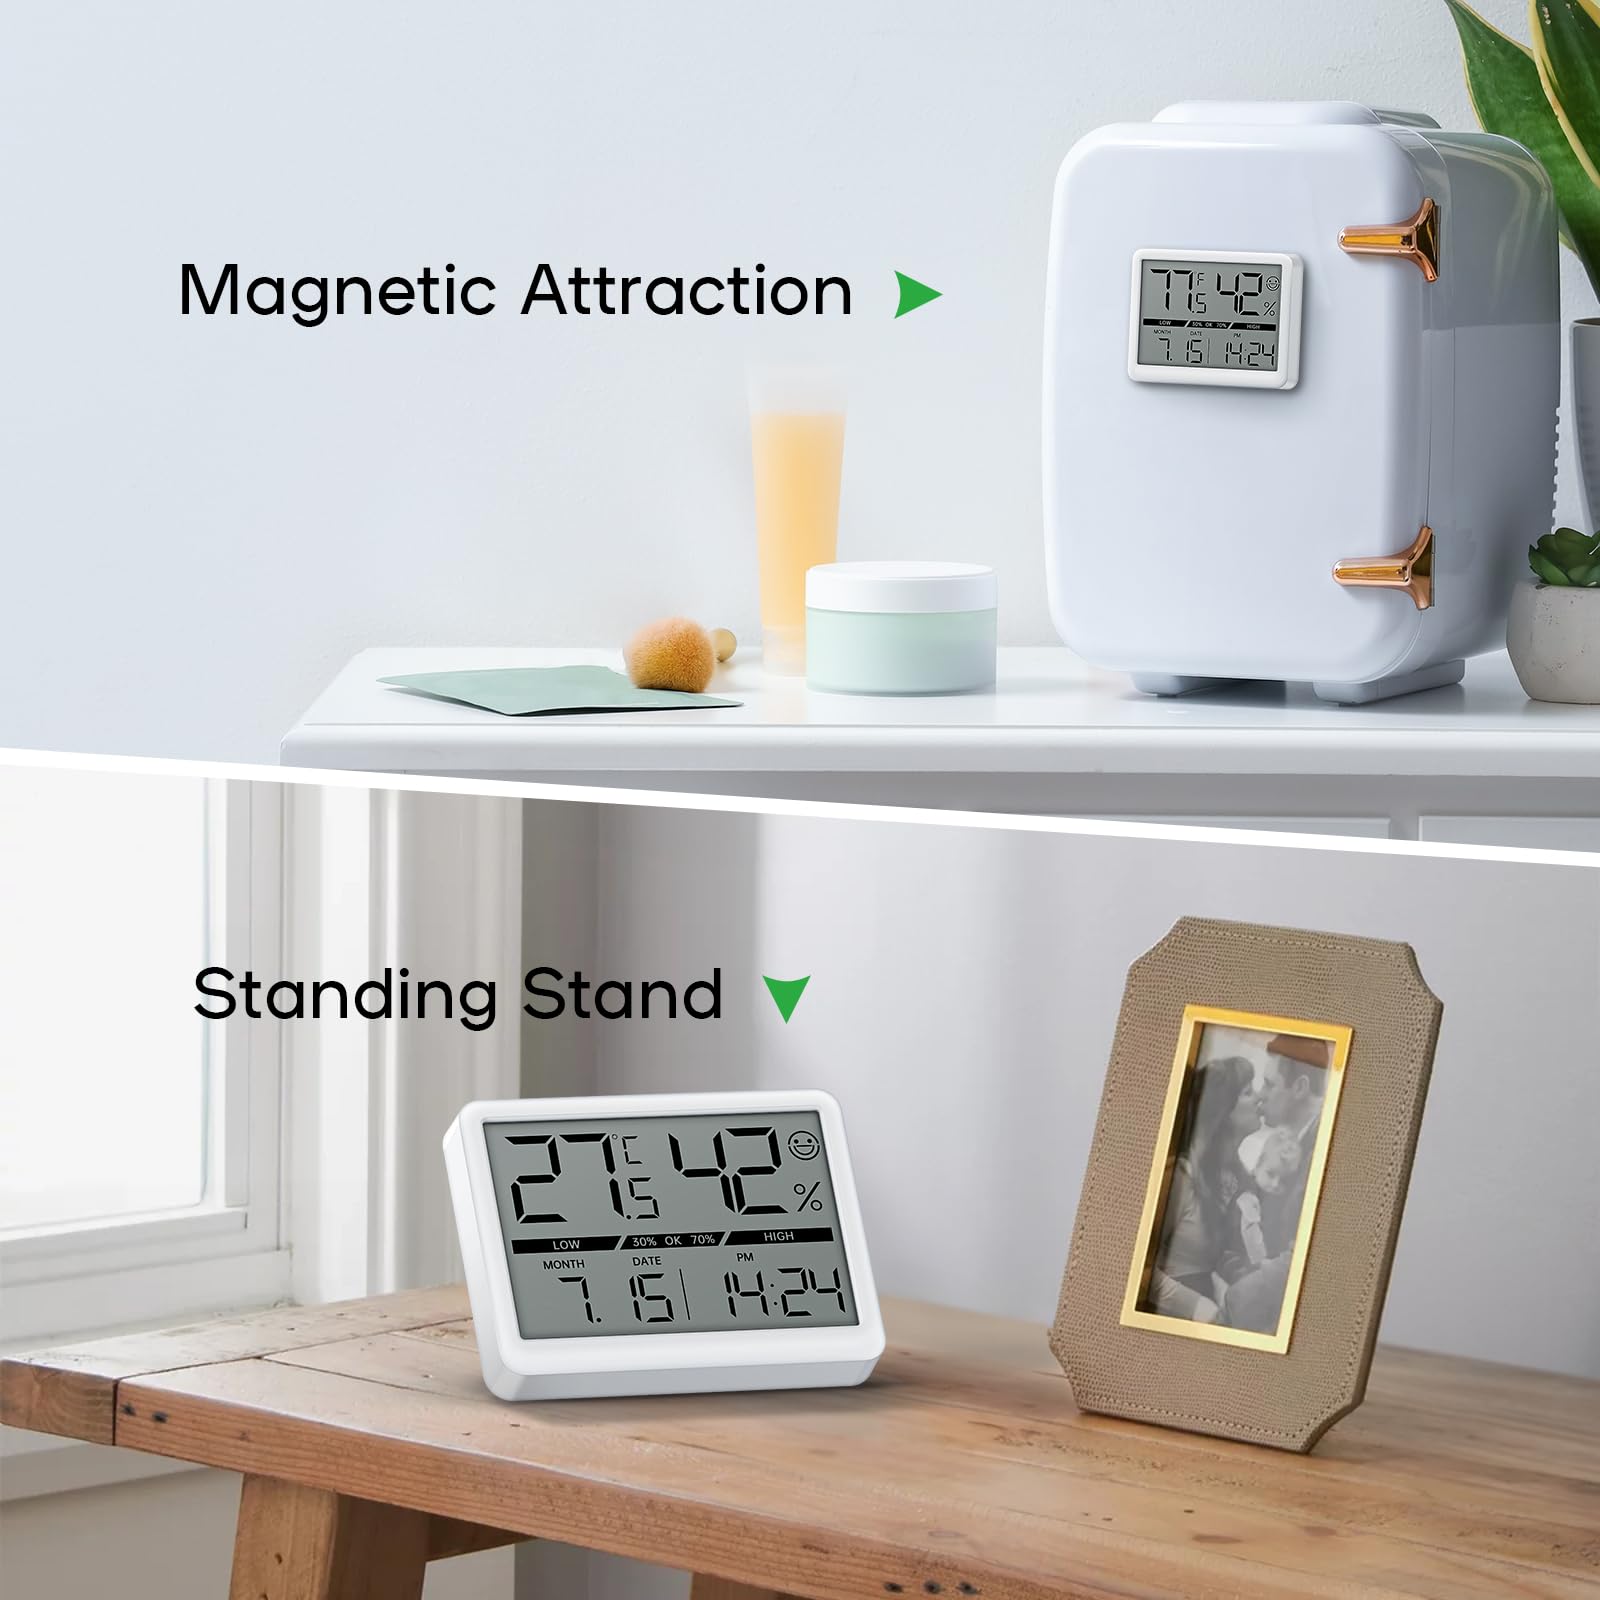 New Upgrade Deeyaple Small Digital Clock Battery Powered Atomic Clock Humidity Meter Magnetic Thermometer High Accuracy Temp(℉/℃) Date 12/24H Display LCD Large Number Indoor Outdoor Travel White